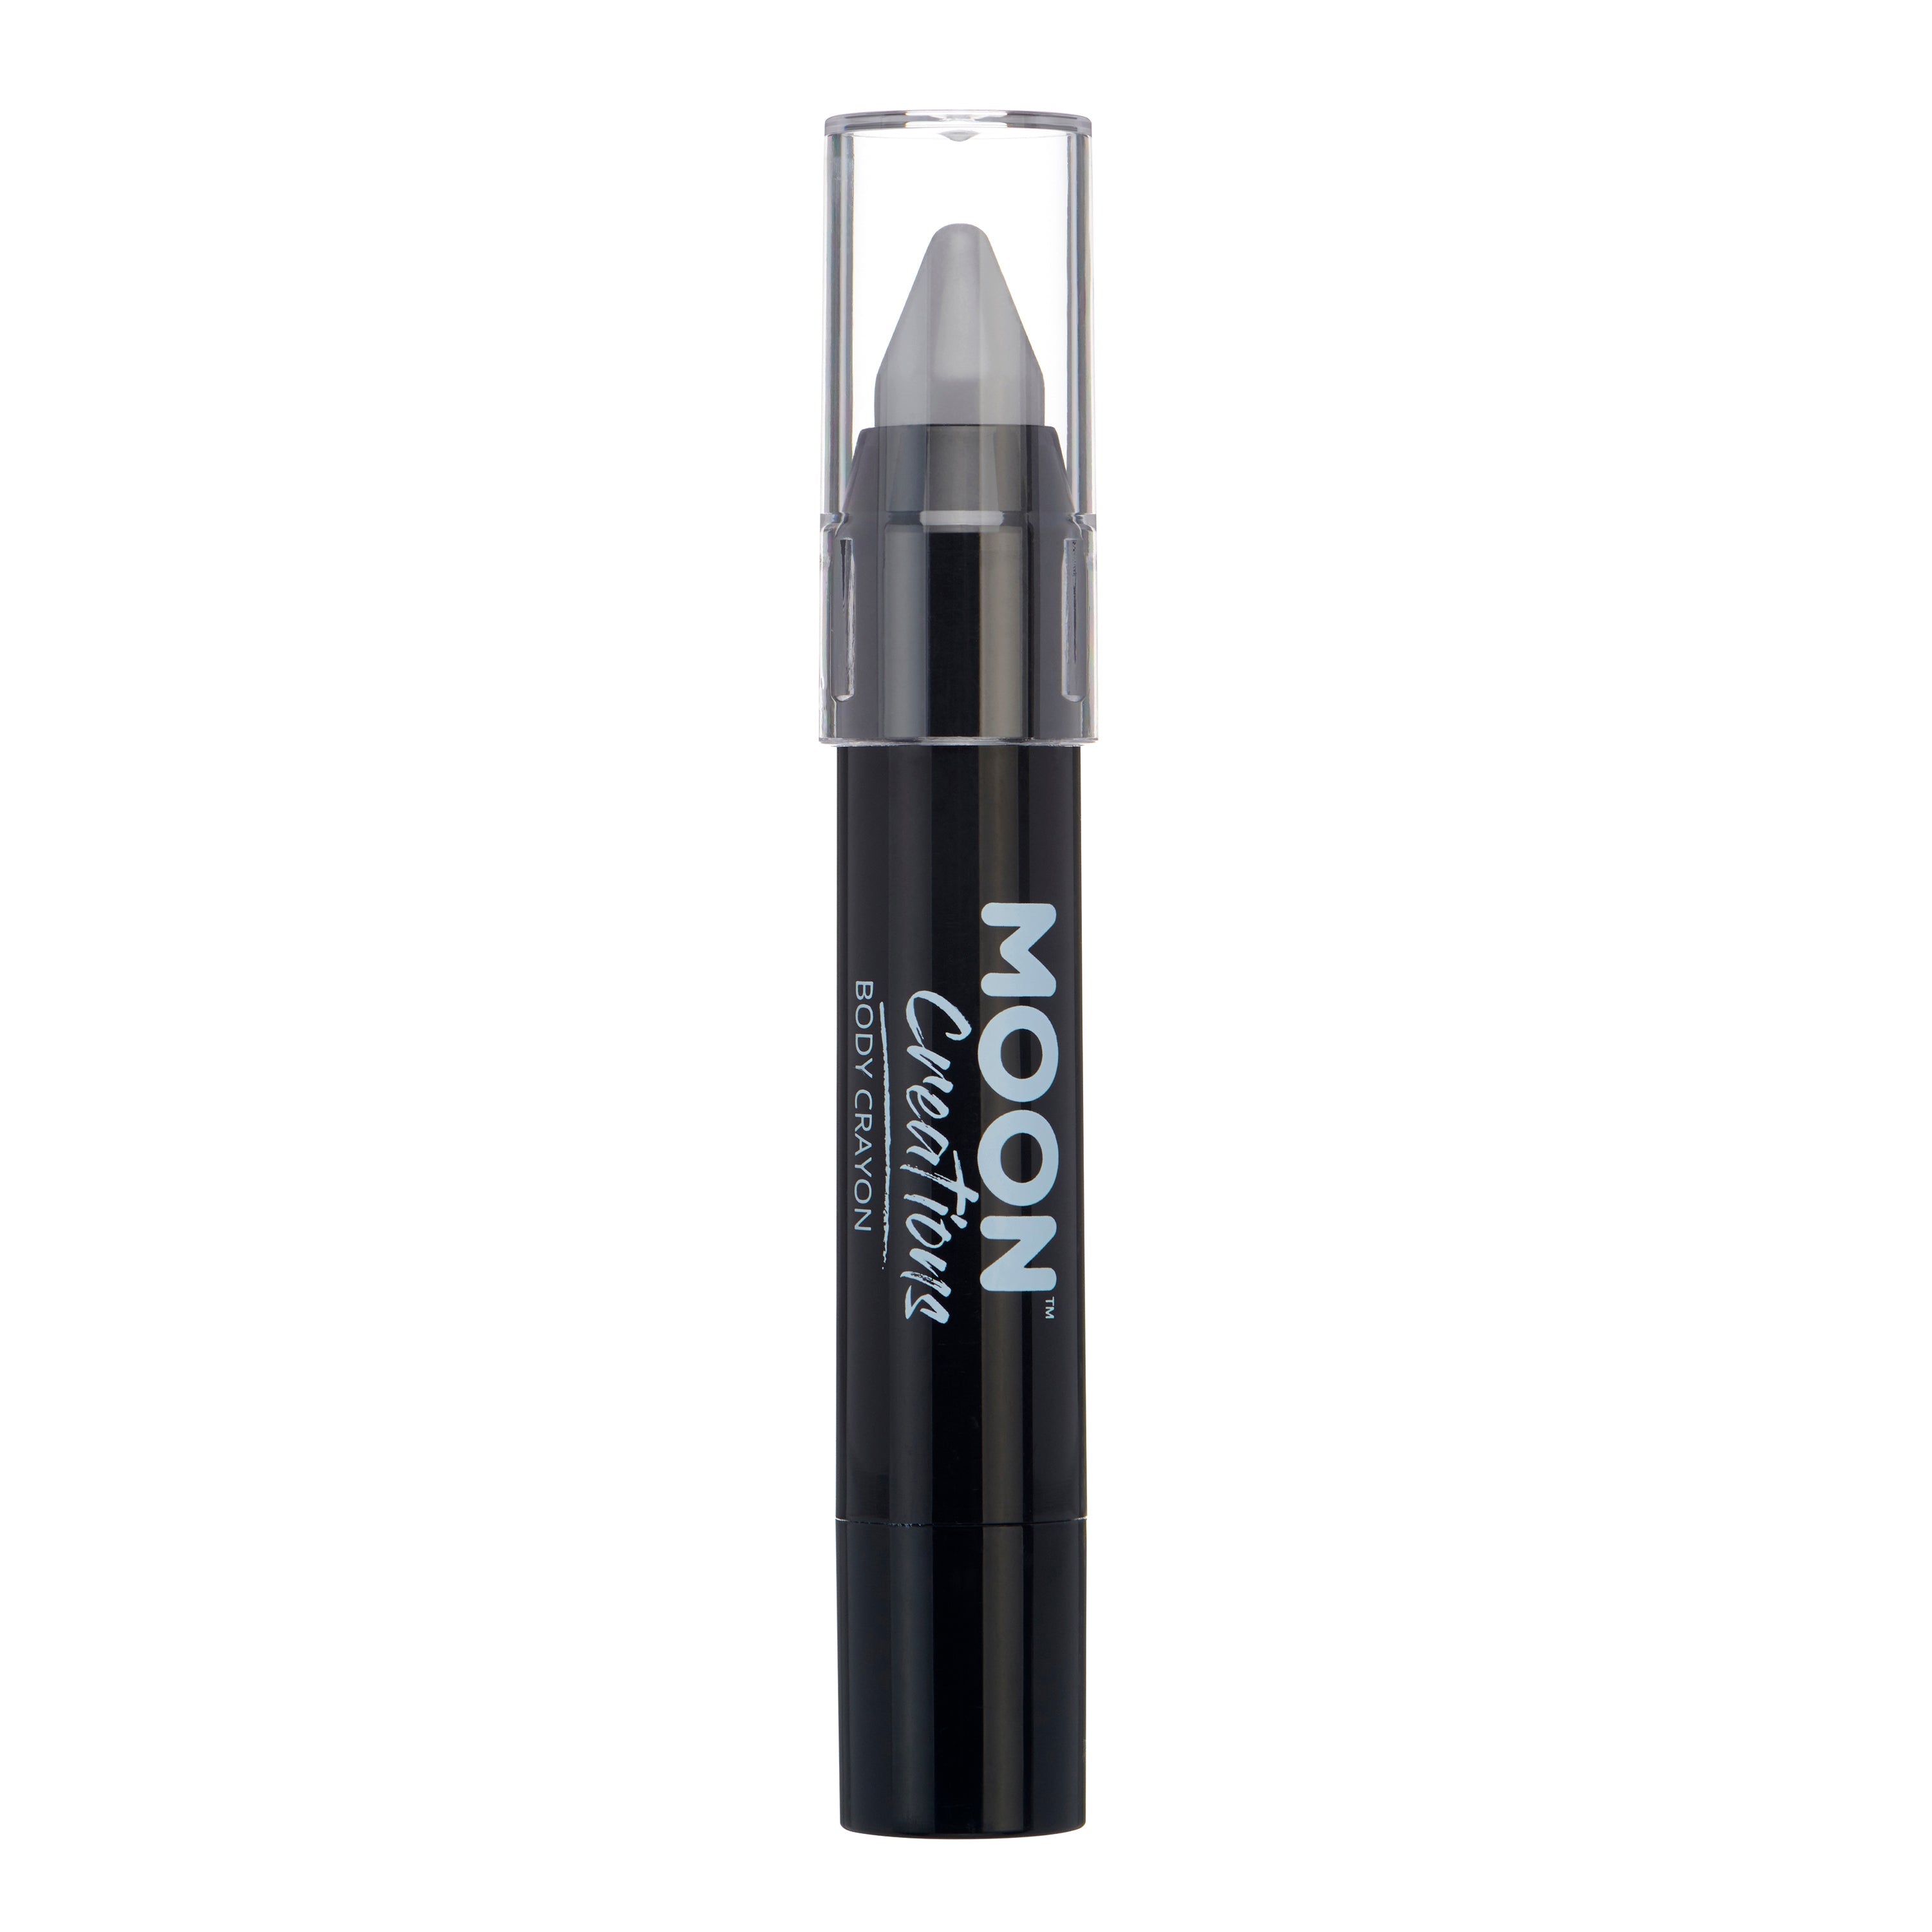 Grey - Face & Body Crayon, 3.5g. Cosmetically certified, FDA & Health Canada compliant and cruelty free.